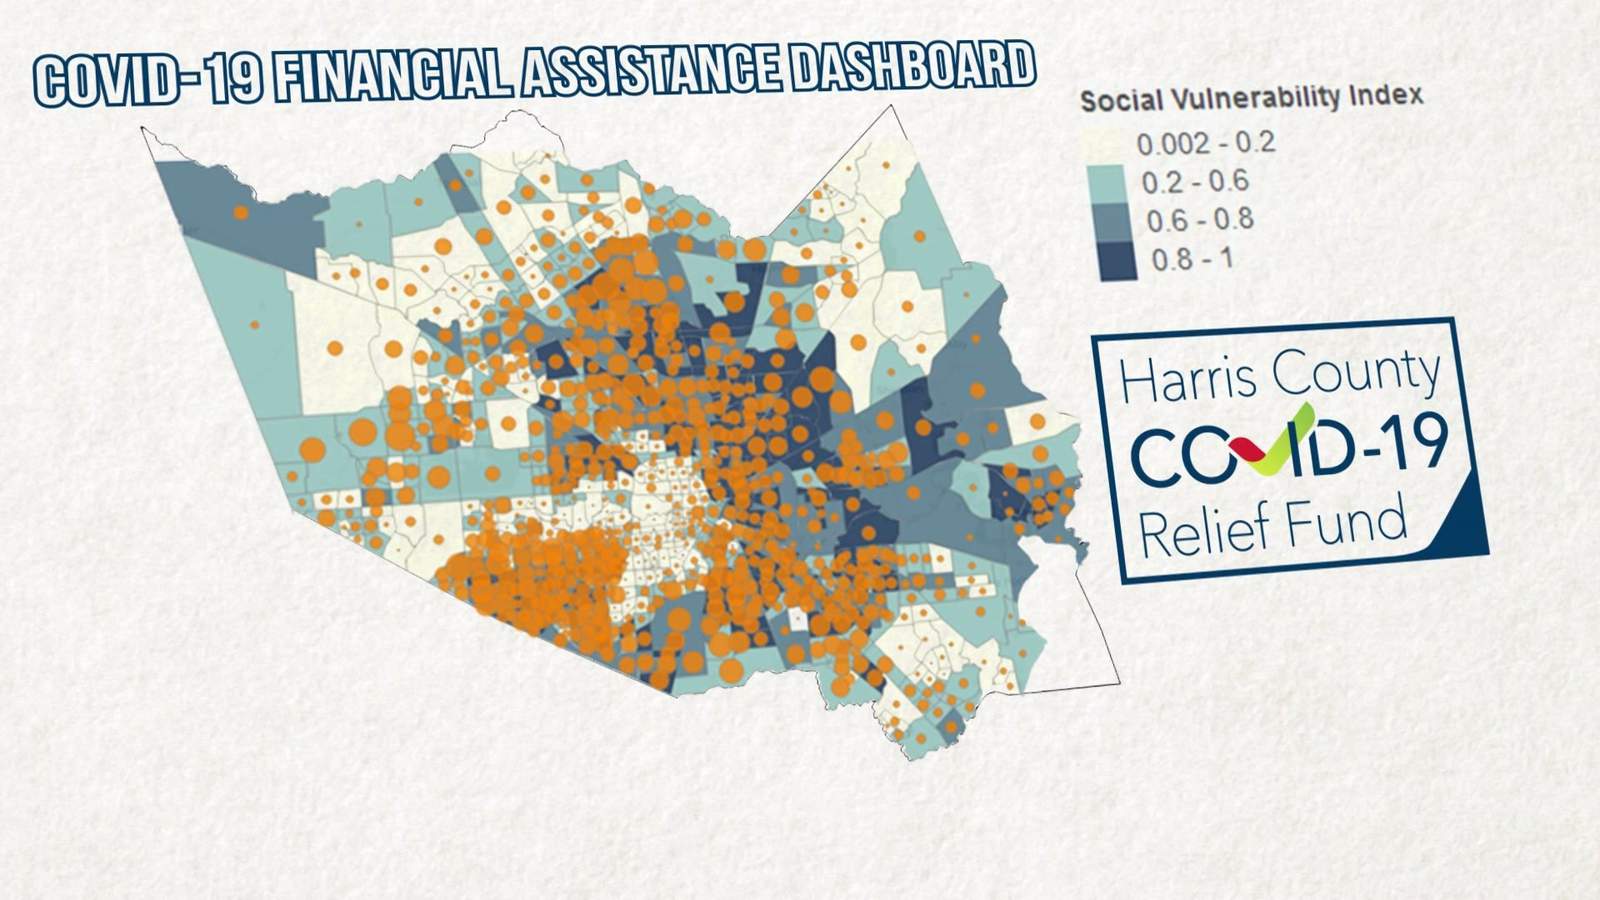 Only a small fraction of applicants got money from Harris County’s $30M COVID-19 relief funds. Where did the money go?